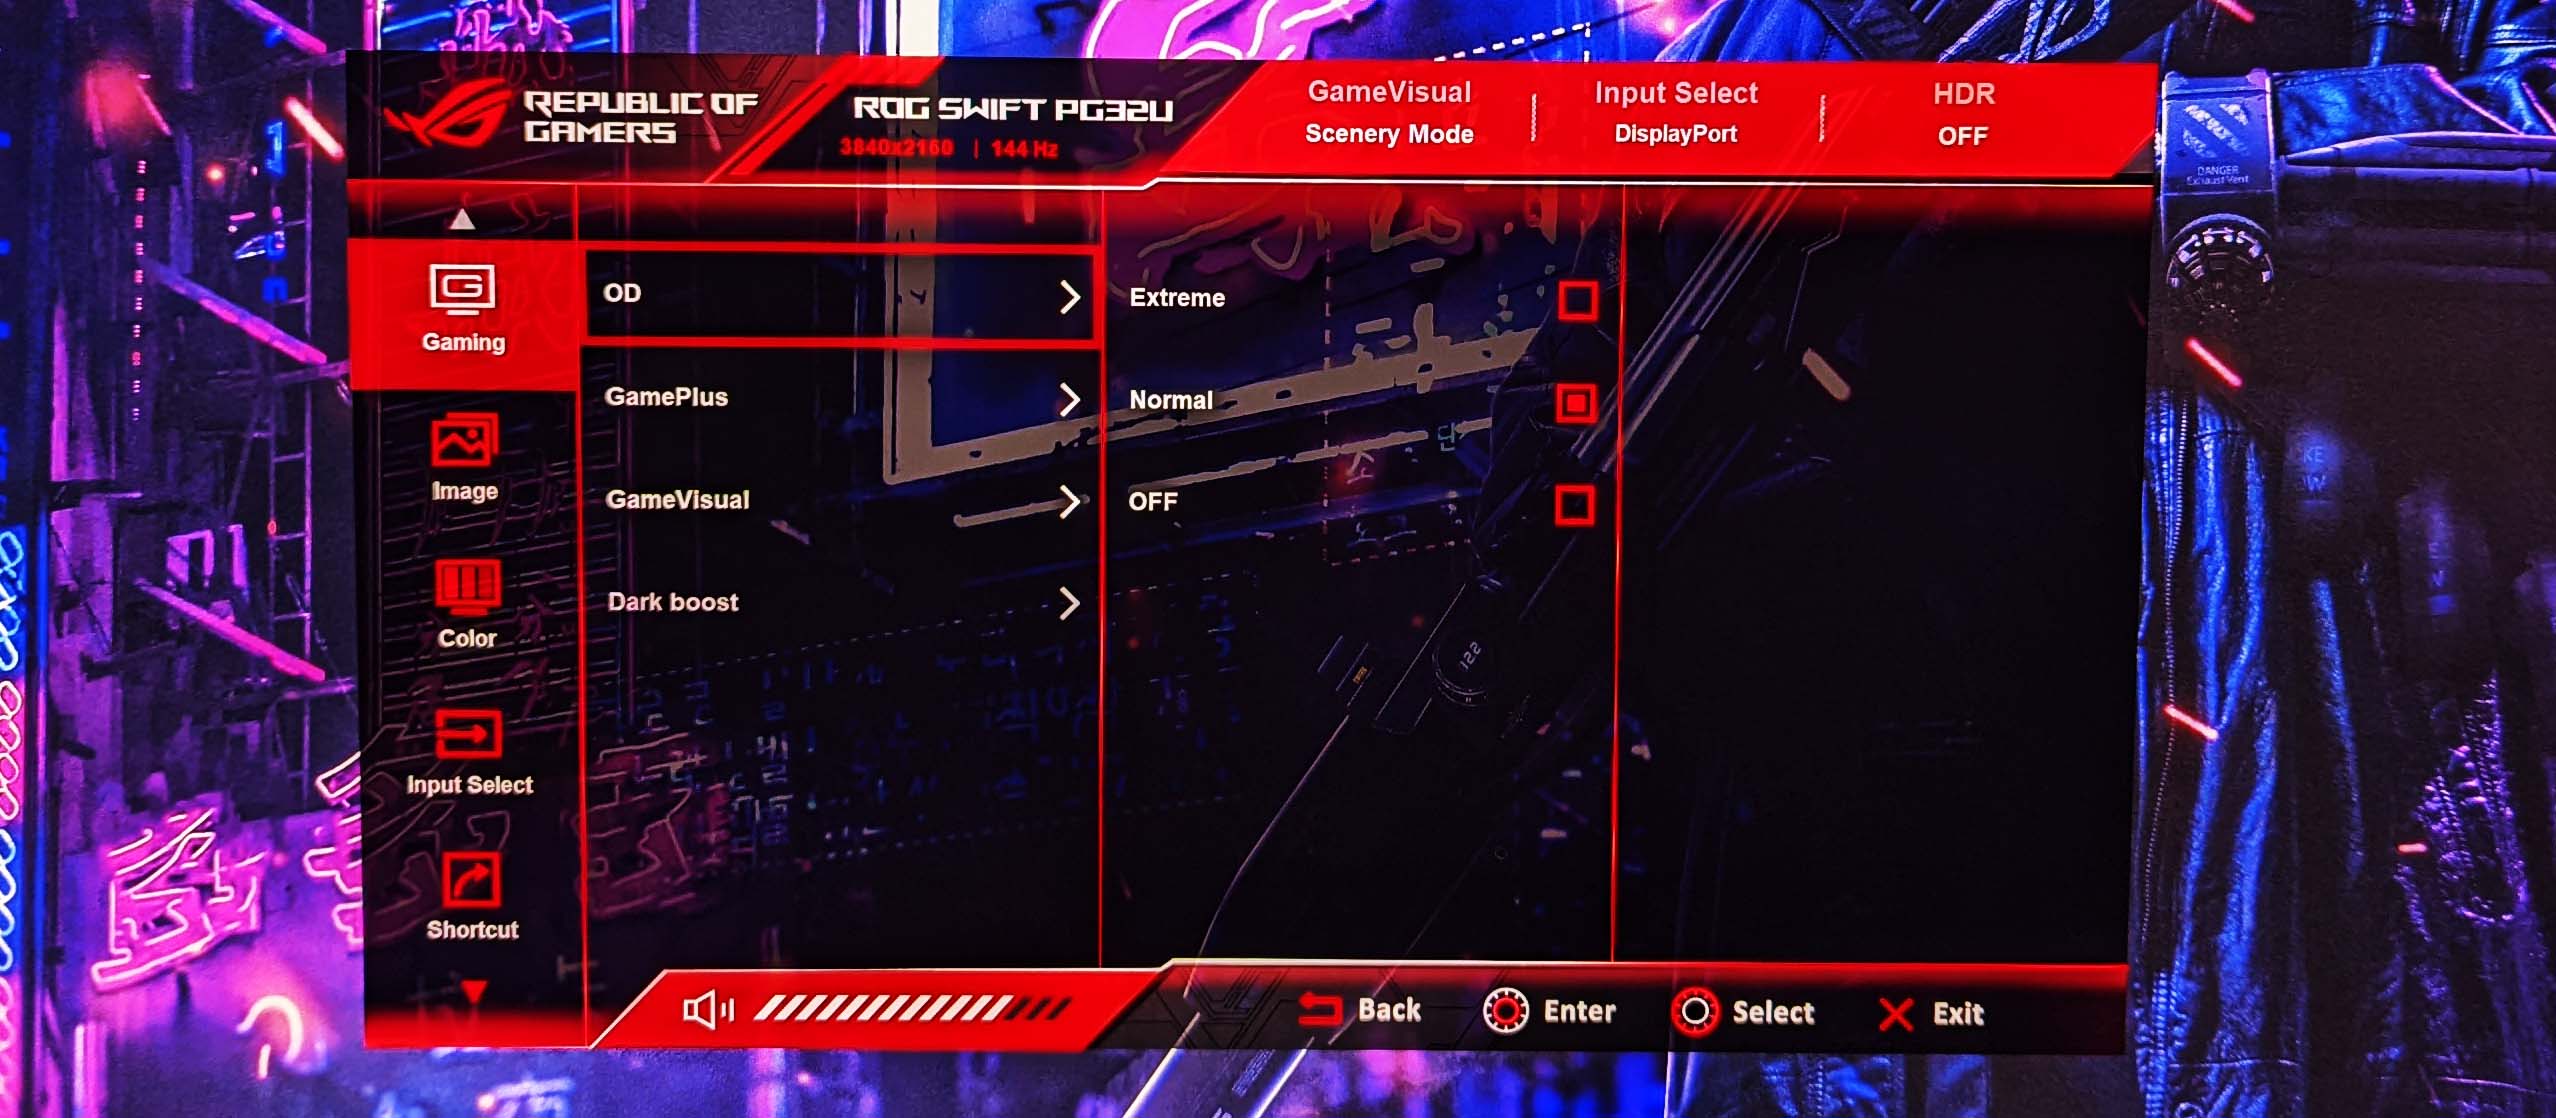 Settings guide: How to set up your new gaming monitor